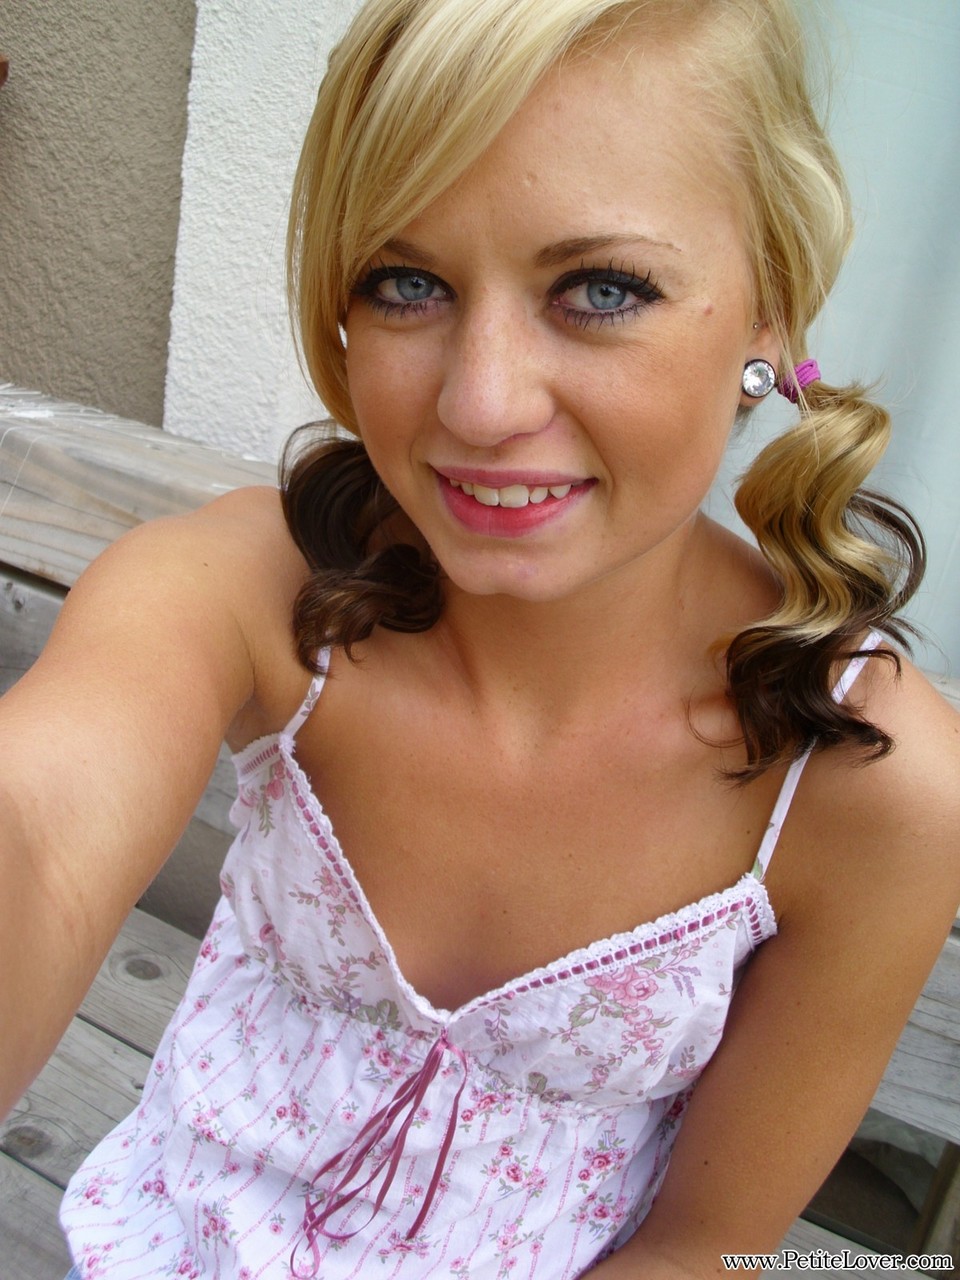 Cute blonde Tiff in pigtails showing off her wee small tits & tiny bald pussy foto porno #428361803 | Petite Lover Pics, Tiff, Amateur, porno ponsel